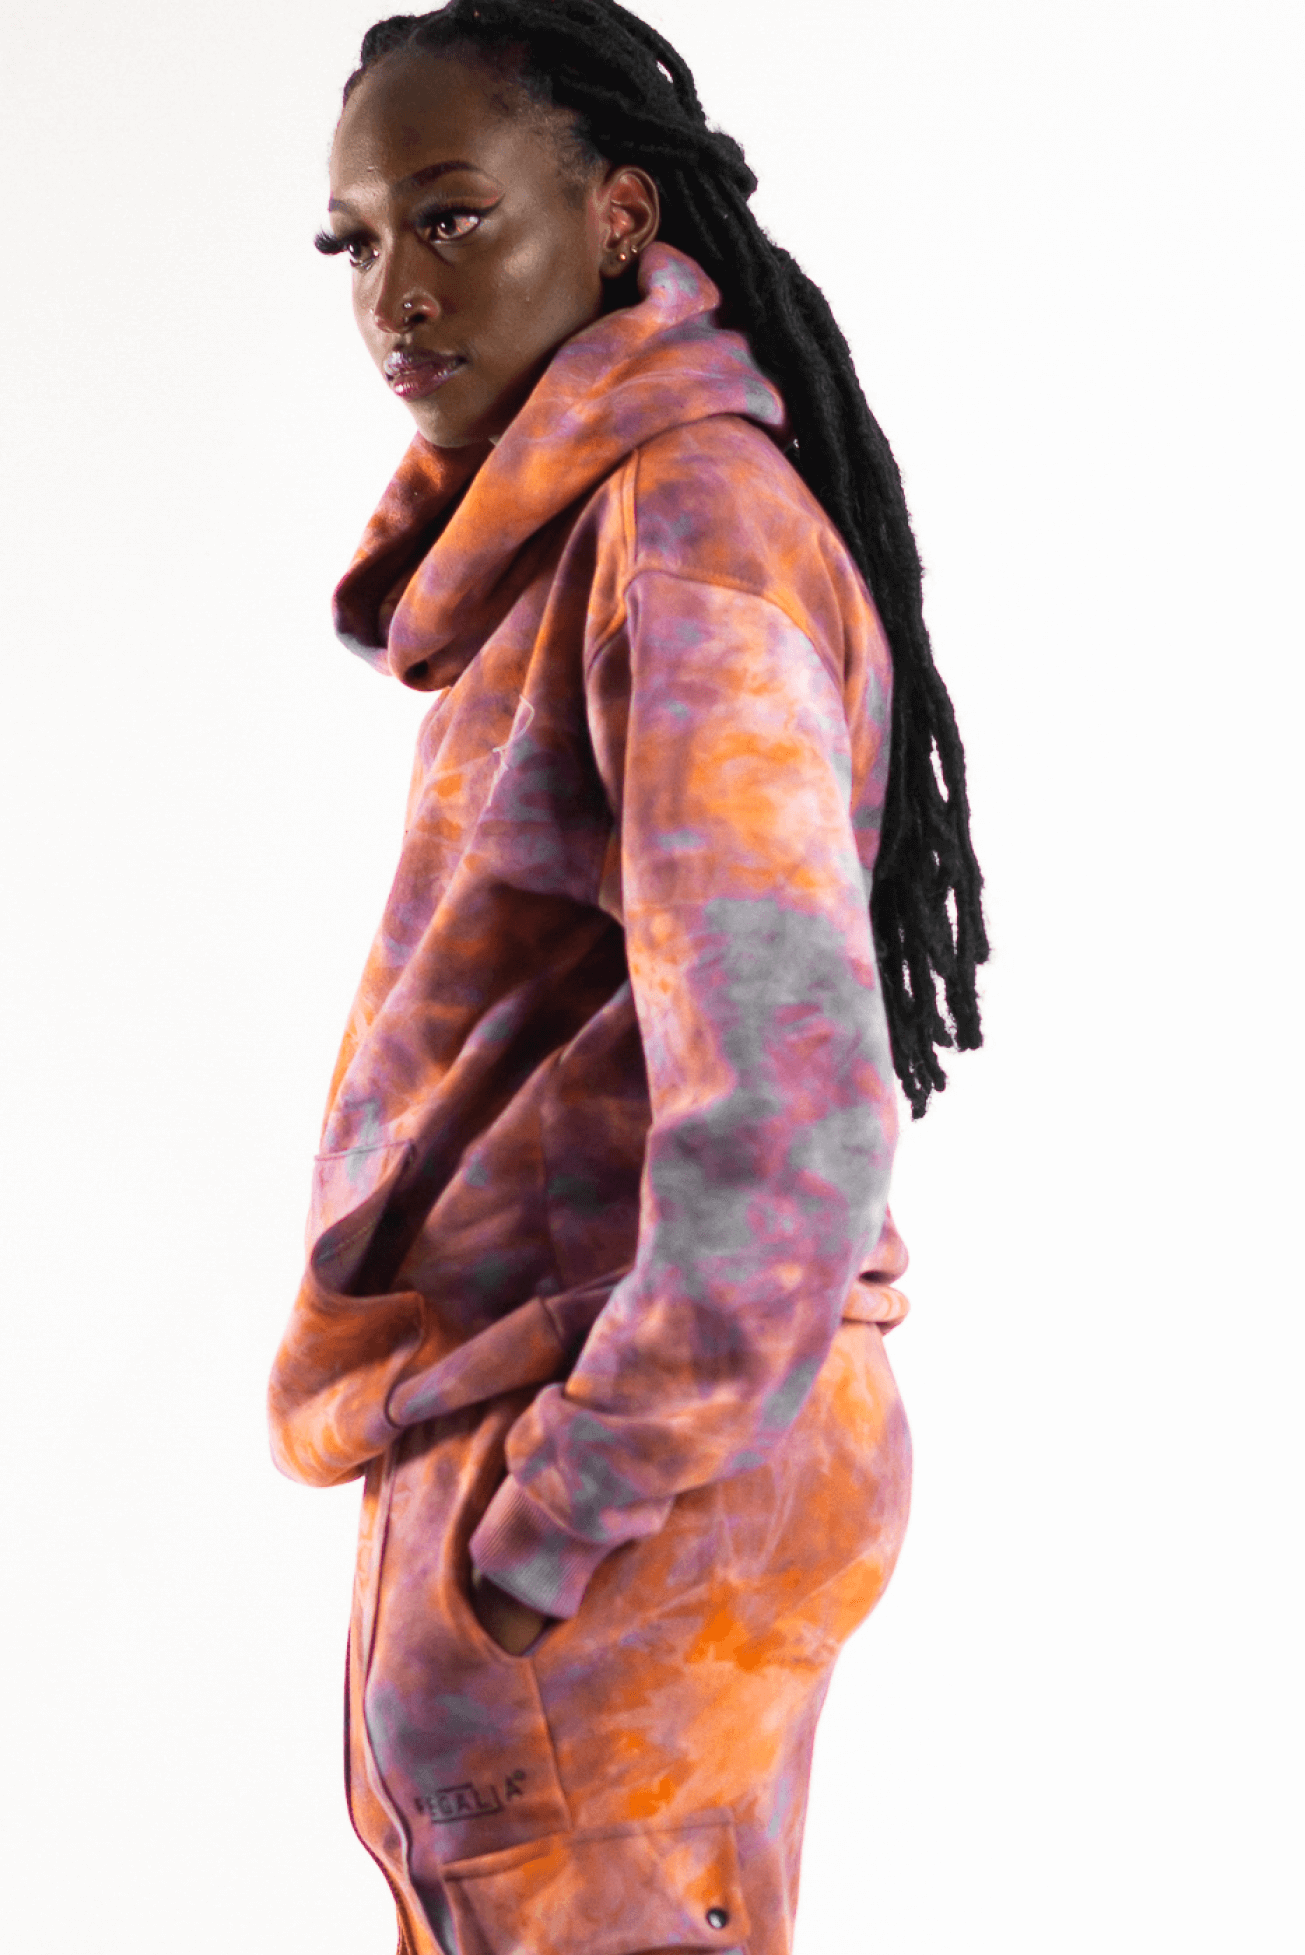 Shop Upeo Hoodie (Orange & Purple Blend) by Regalia Apparel on Arrai. Discover stylish, affordable clothing, jewelry, handbags and unique handmade pieces from top Kenyan & African fashion brands prioritising sustainability and quality craftsmanship.